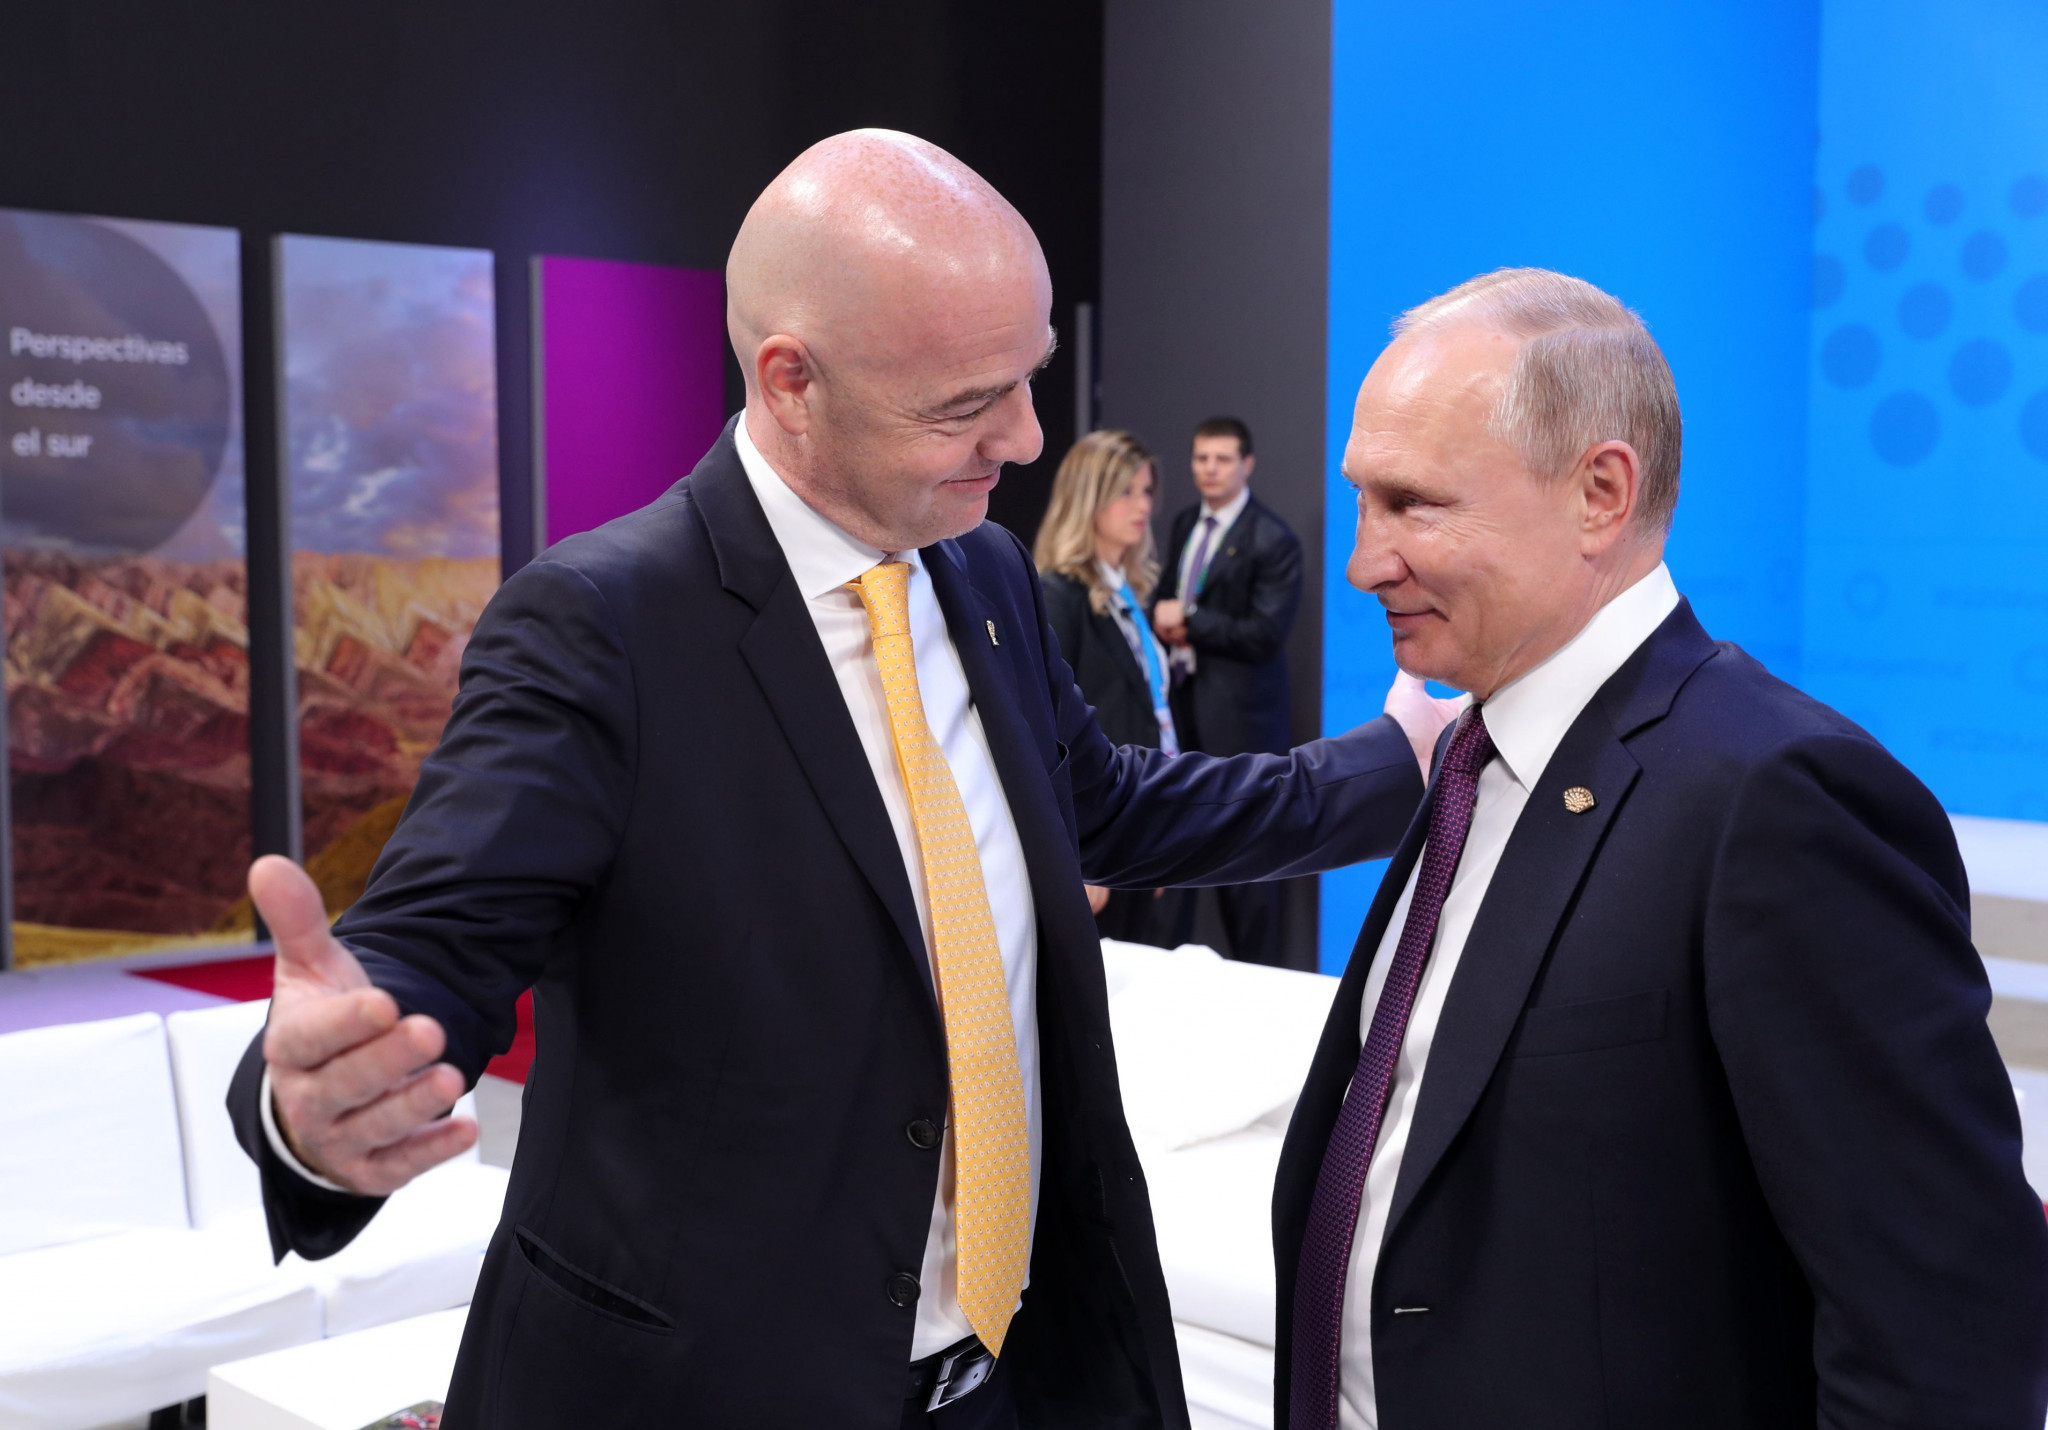 FIFA President Gianni Infantino congratulated Russian leader Vladimir Putin during the G20 Summit in Buenos Aires for hosting 